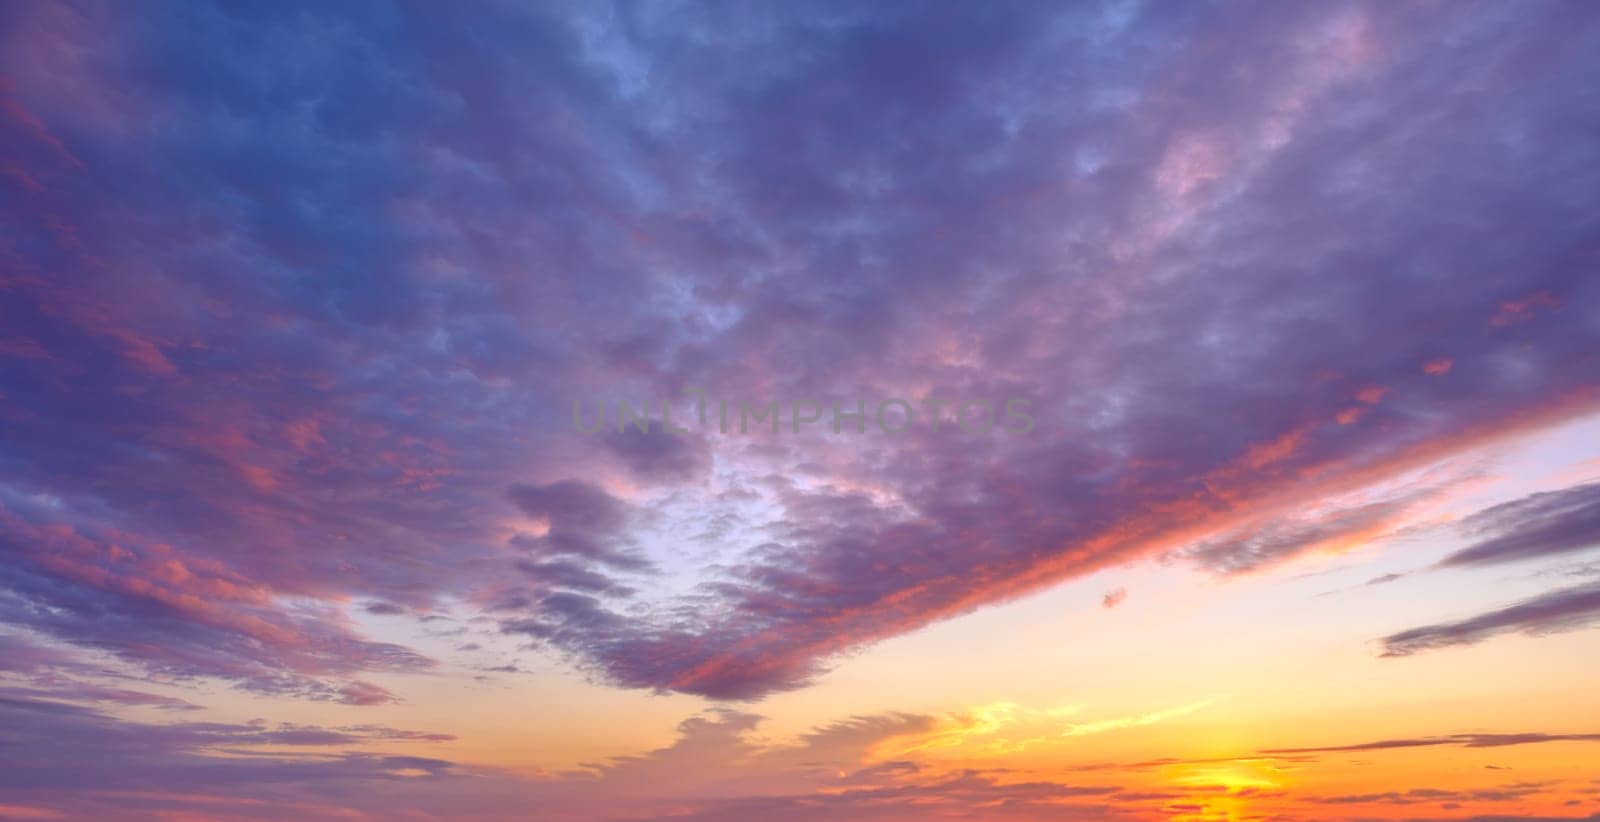 Sunset sky background by dimol